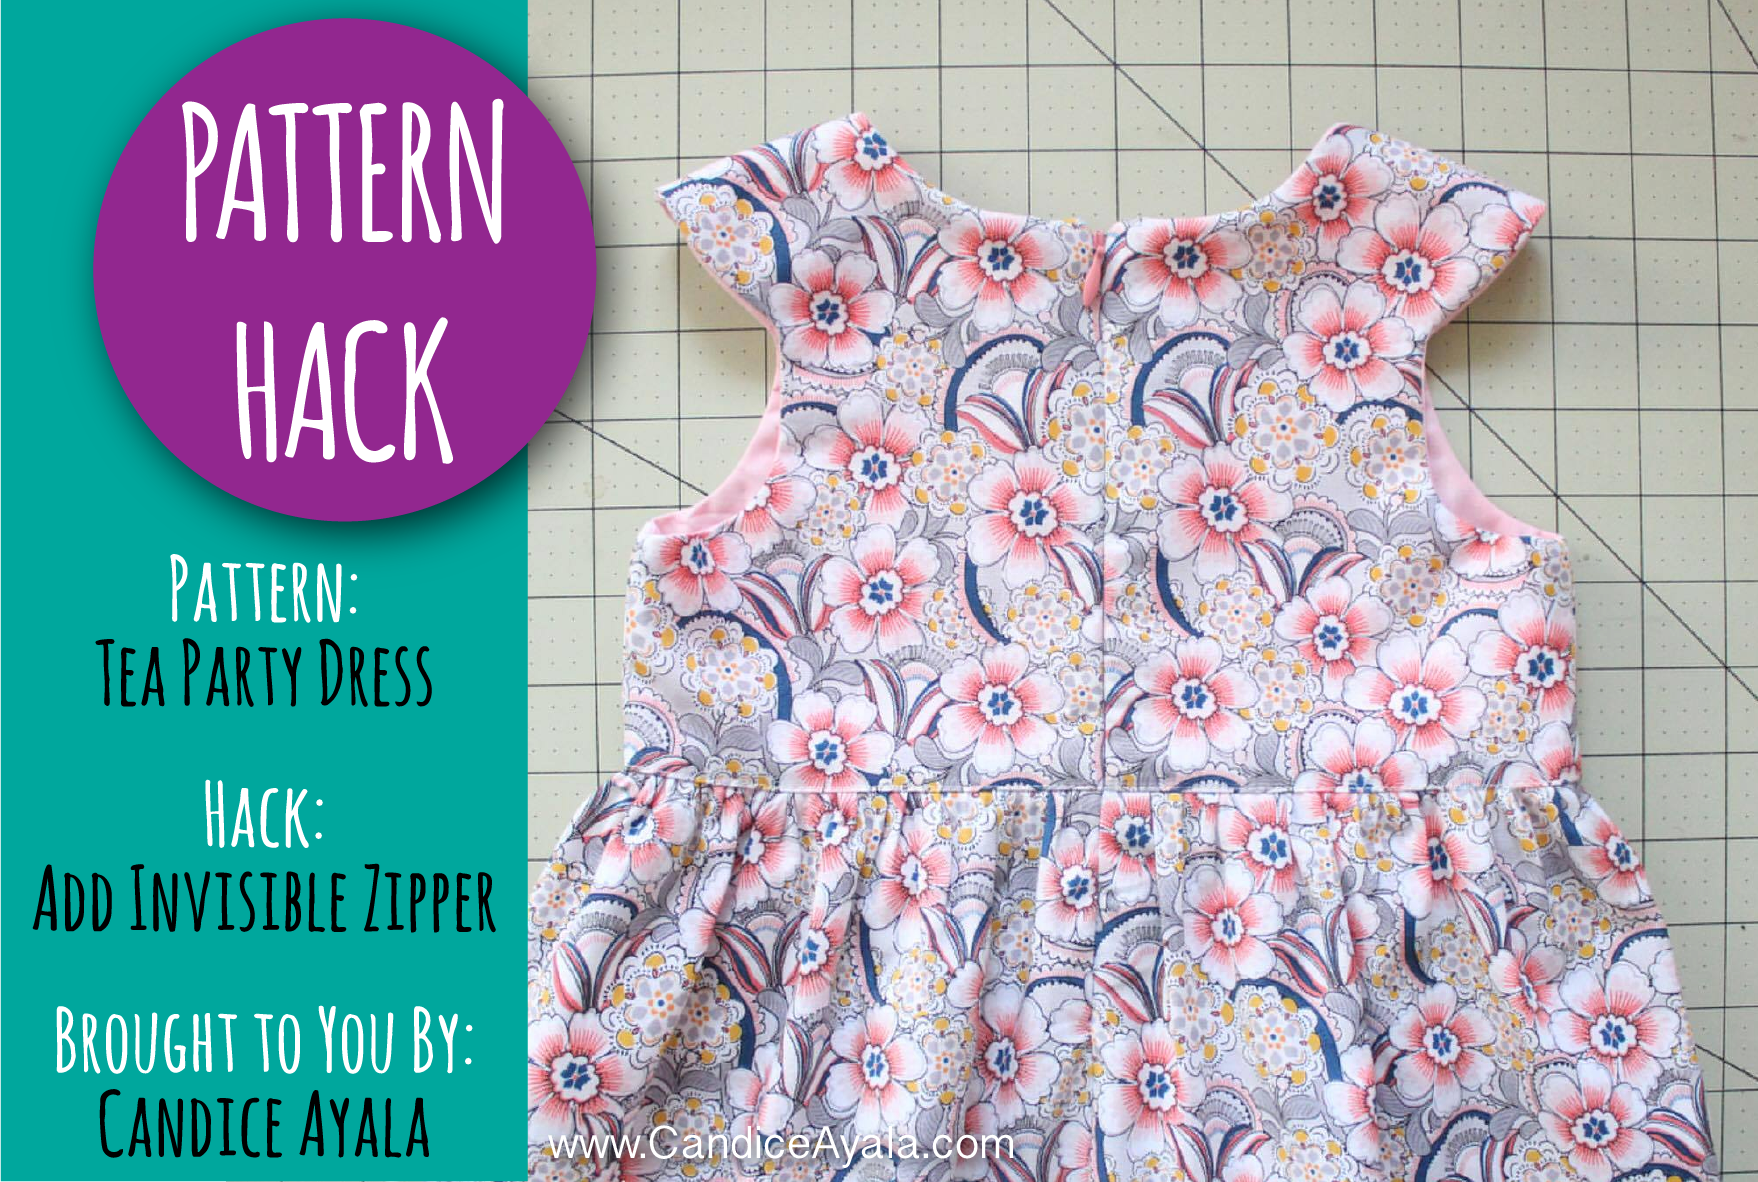 PATTERN HACK - Adding an invisible zip to the Tea Party Dress